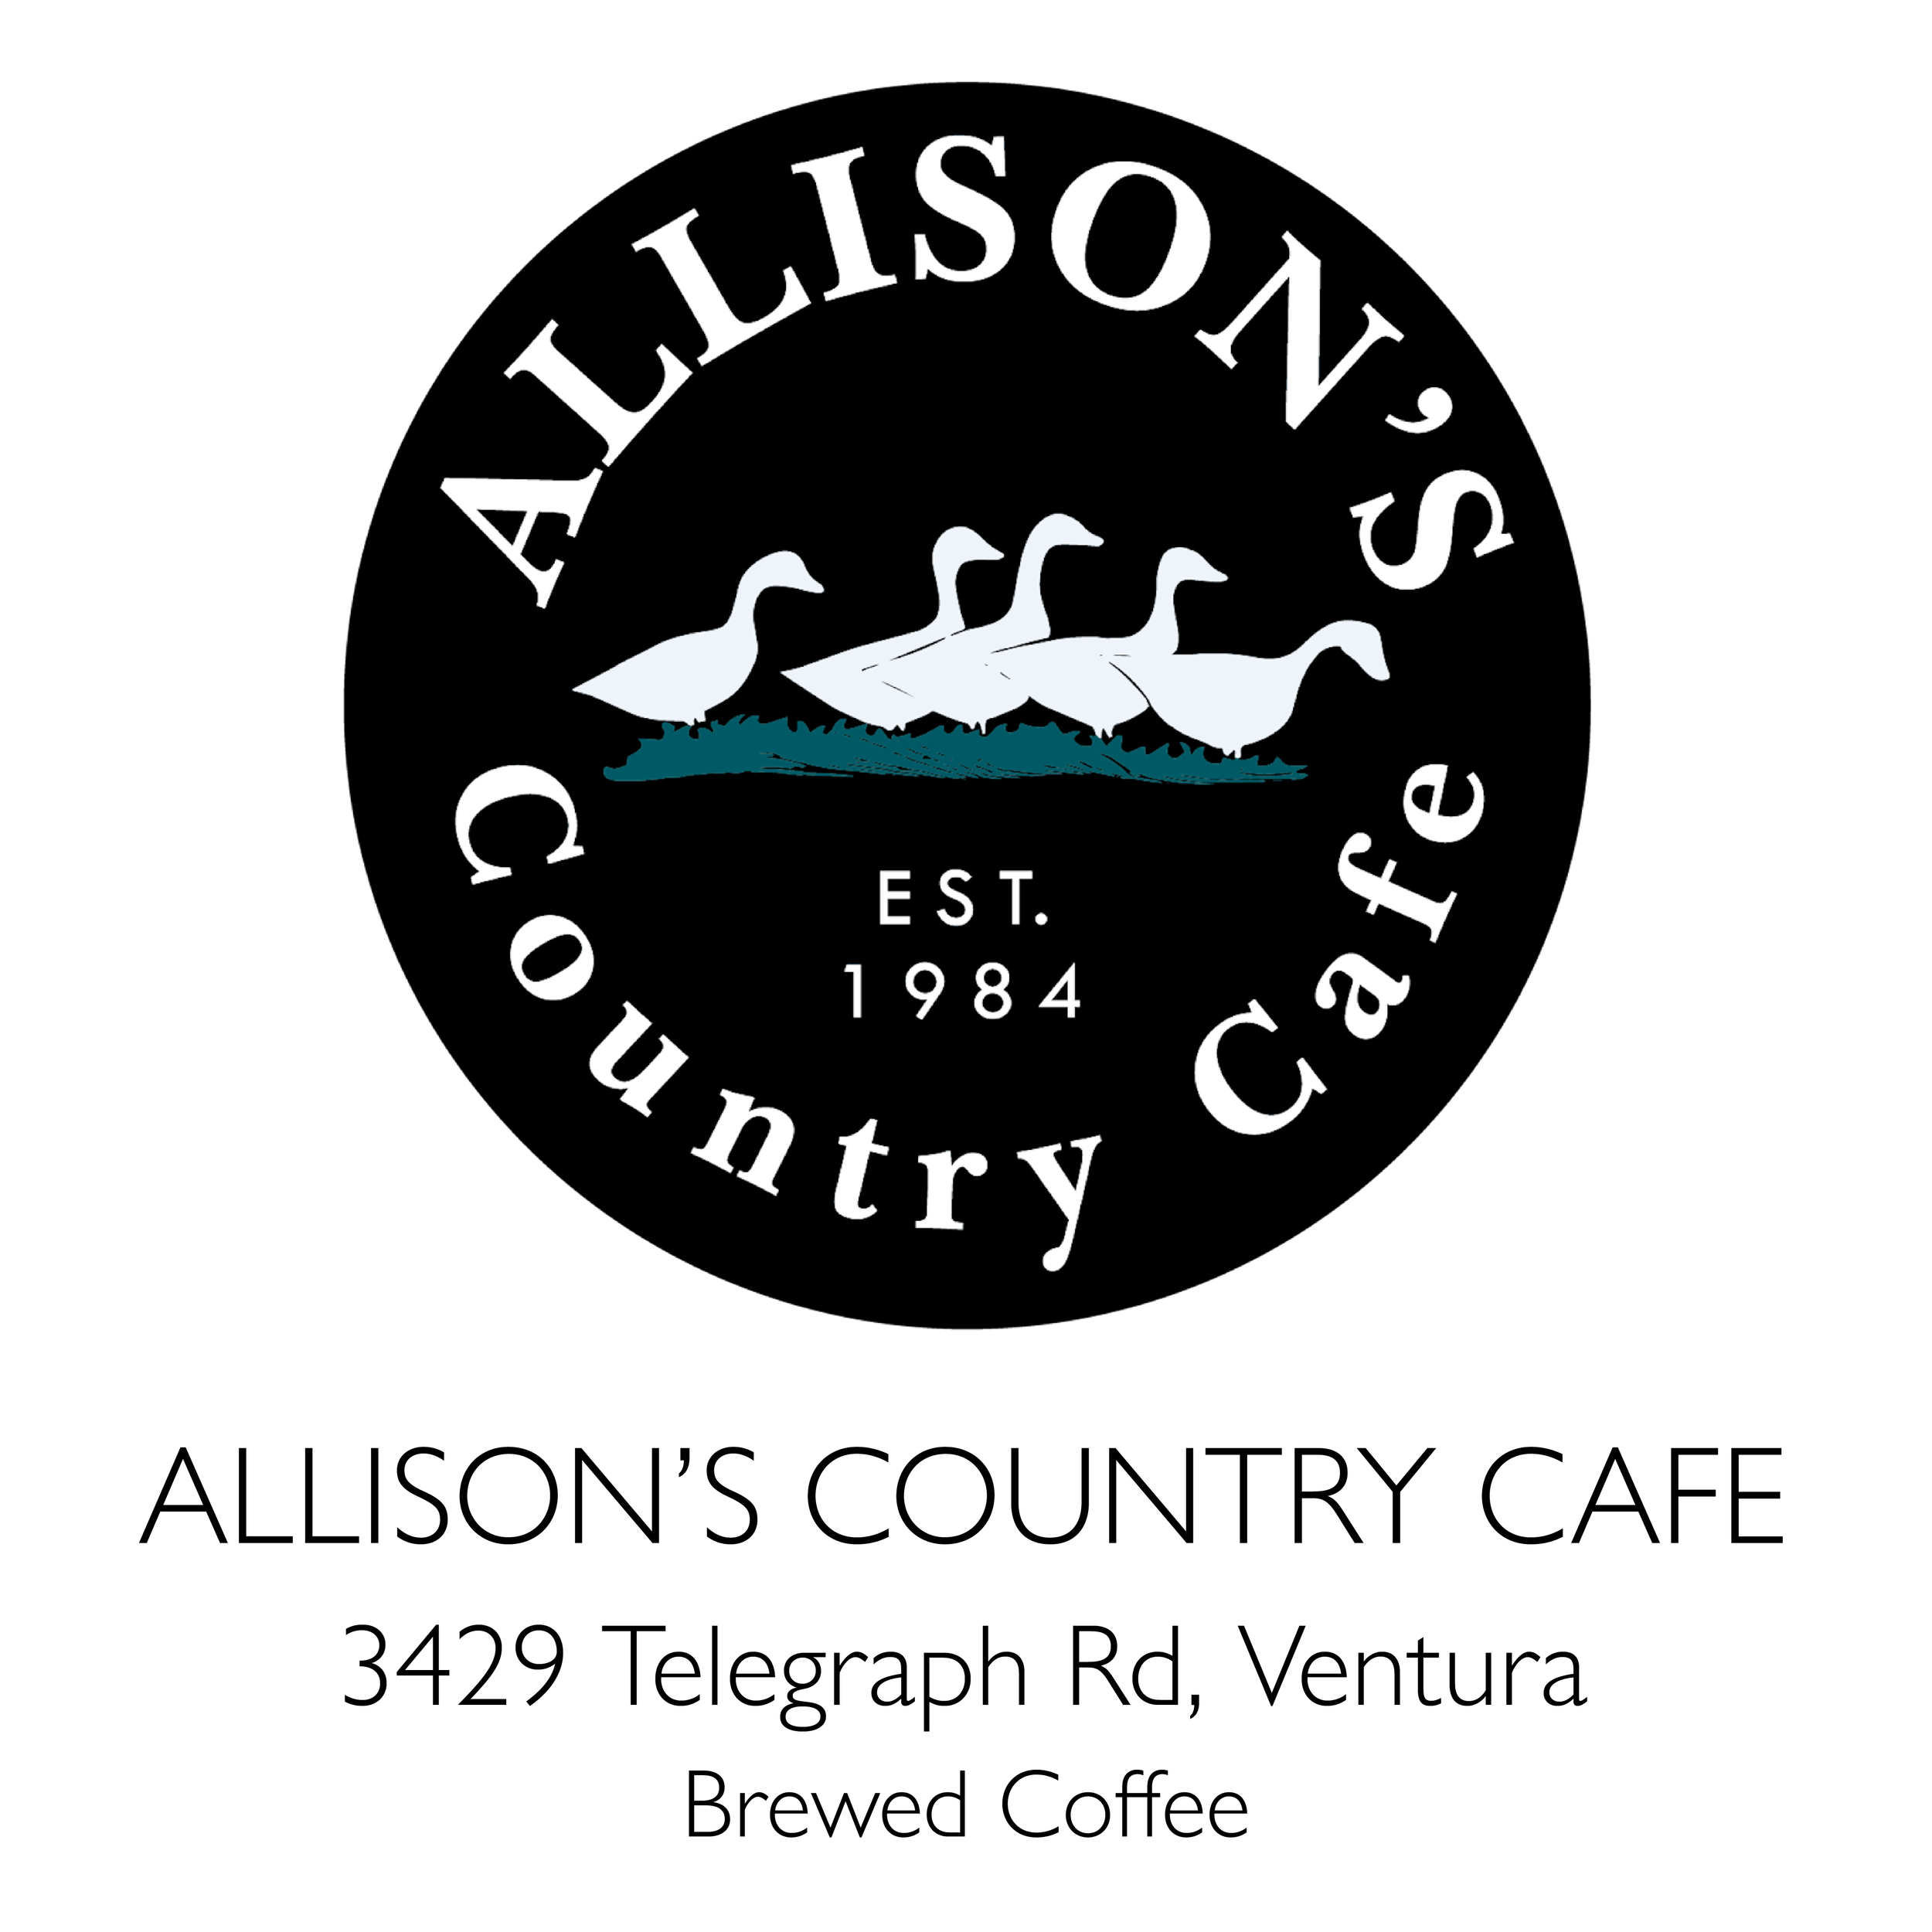 Allison's Country Cafe